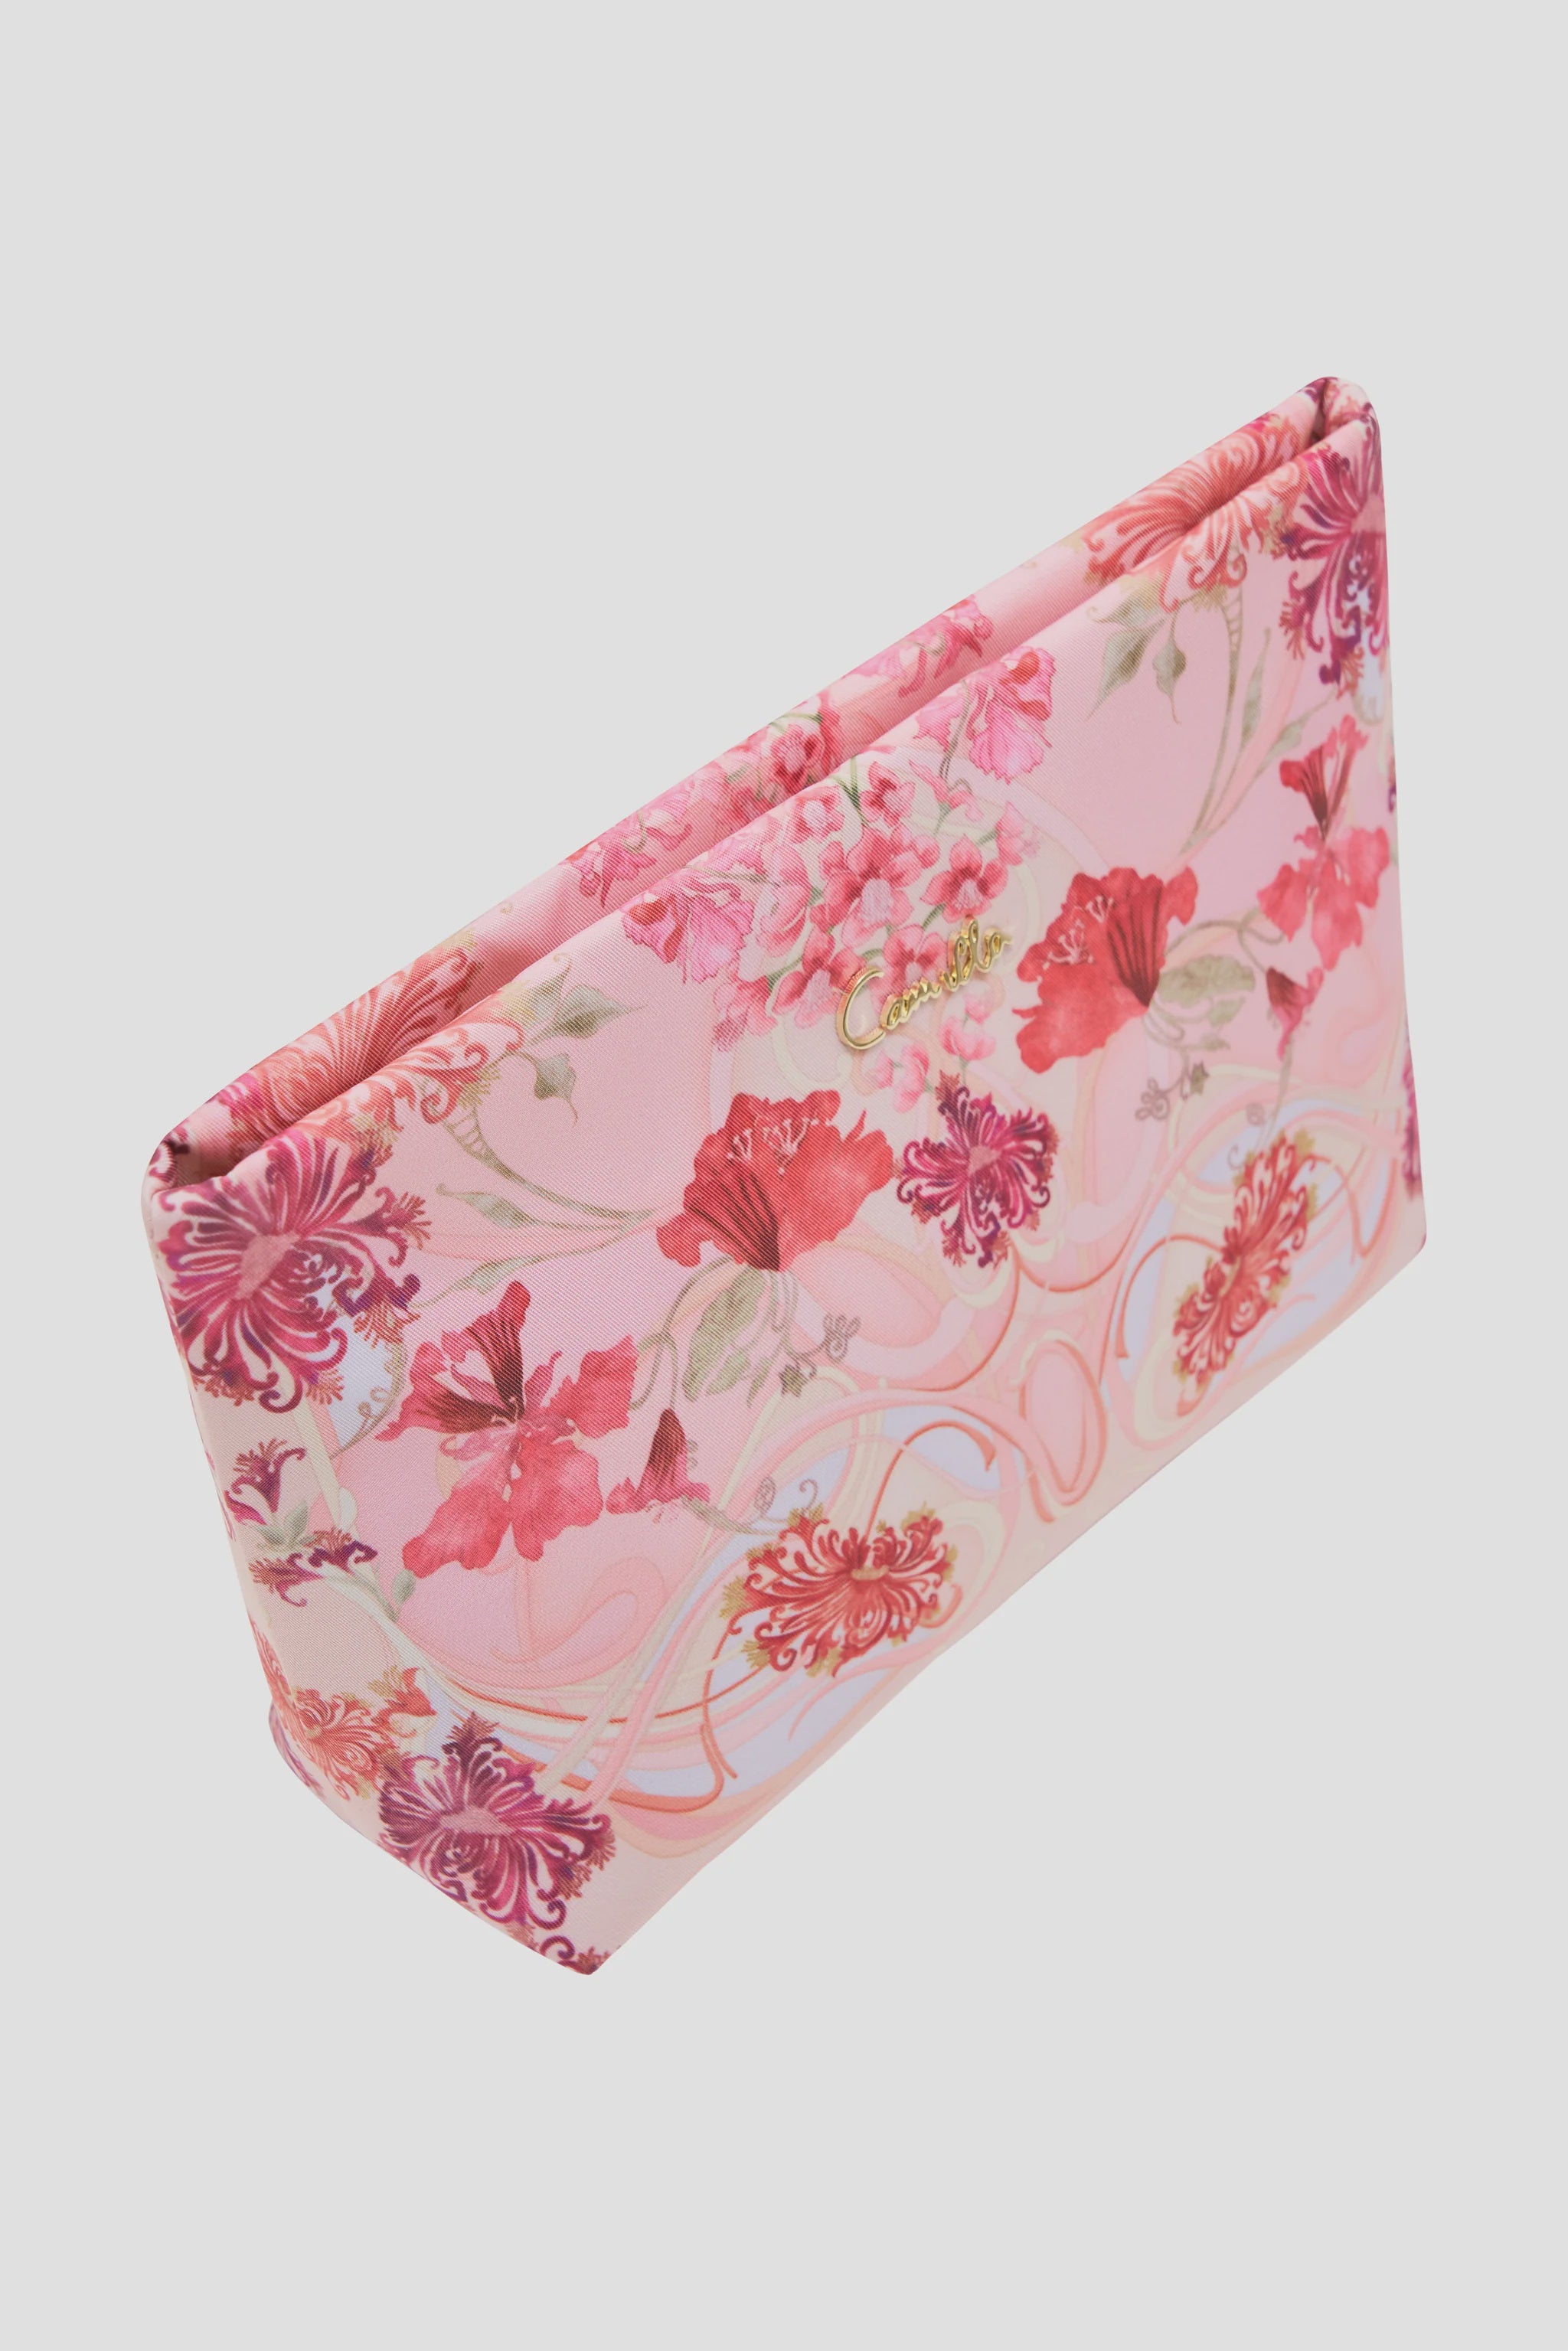 Small Makeup Clutch - Blossoms and Brushstrokes